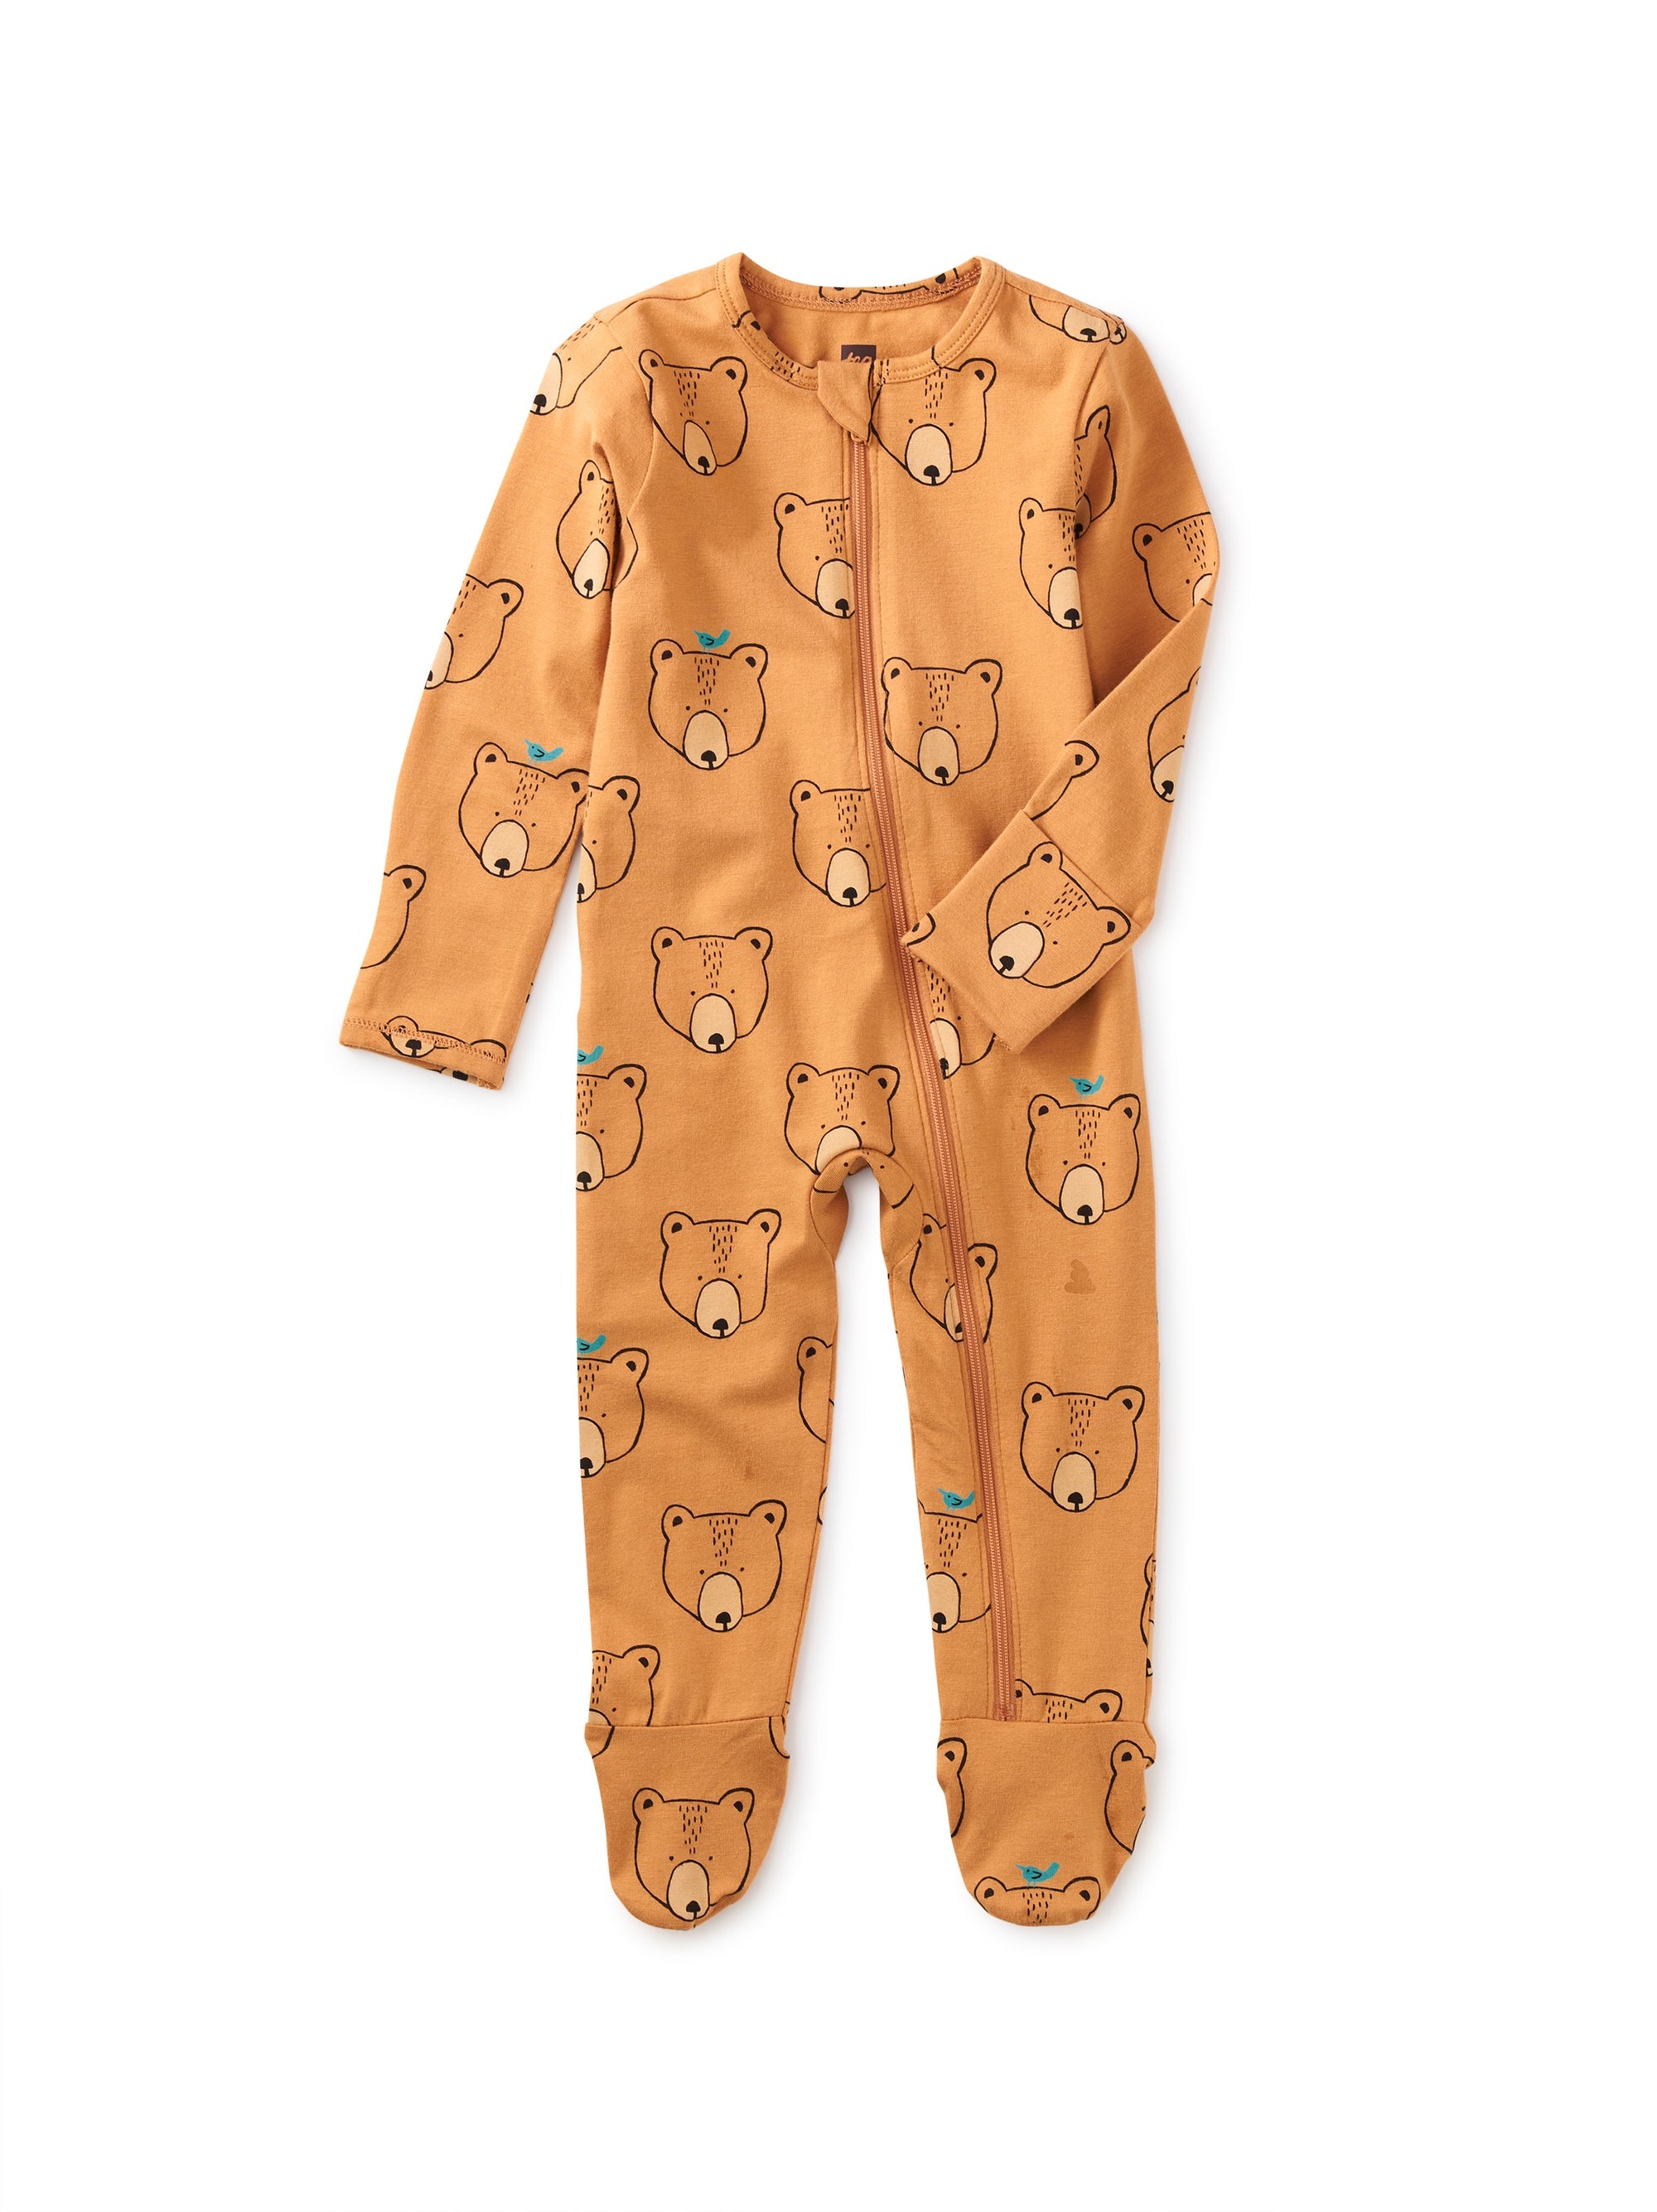 Footed Zip Front Romper - Oso y Ave / Bear and Bird